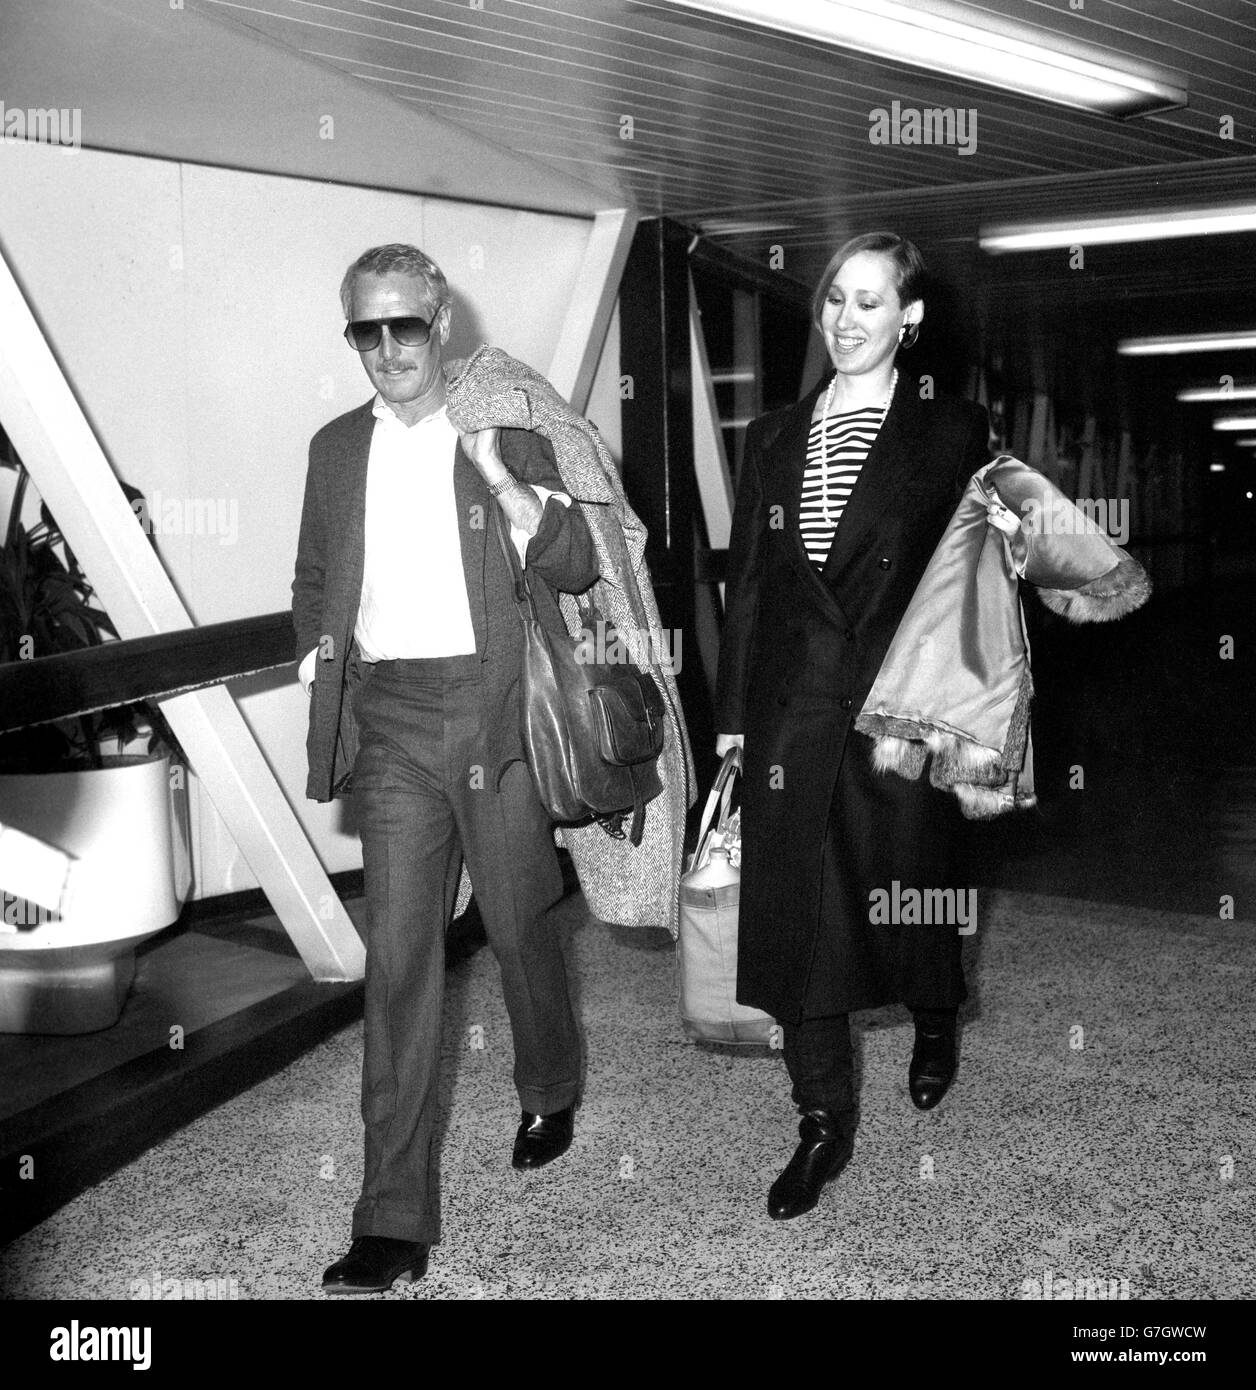 American film actor Paul Newman arrives at Heathrow Airport after travelling from New York by Concorde. Stock Photo